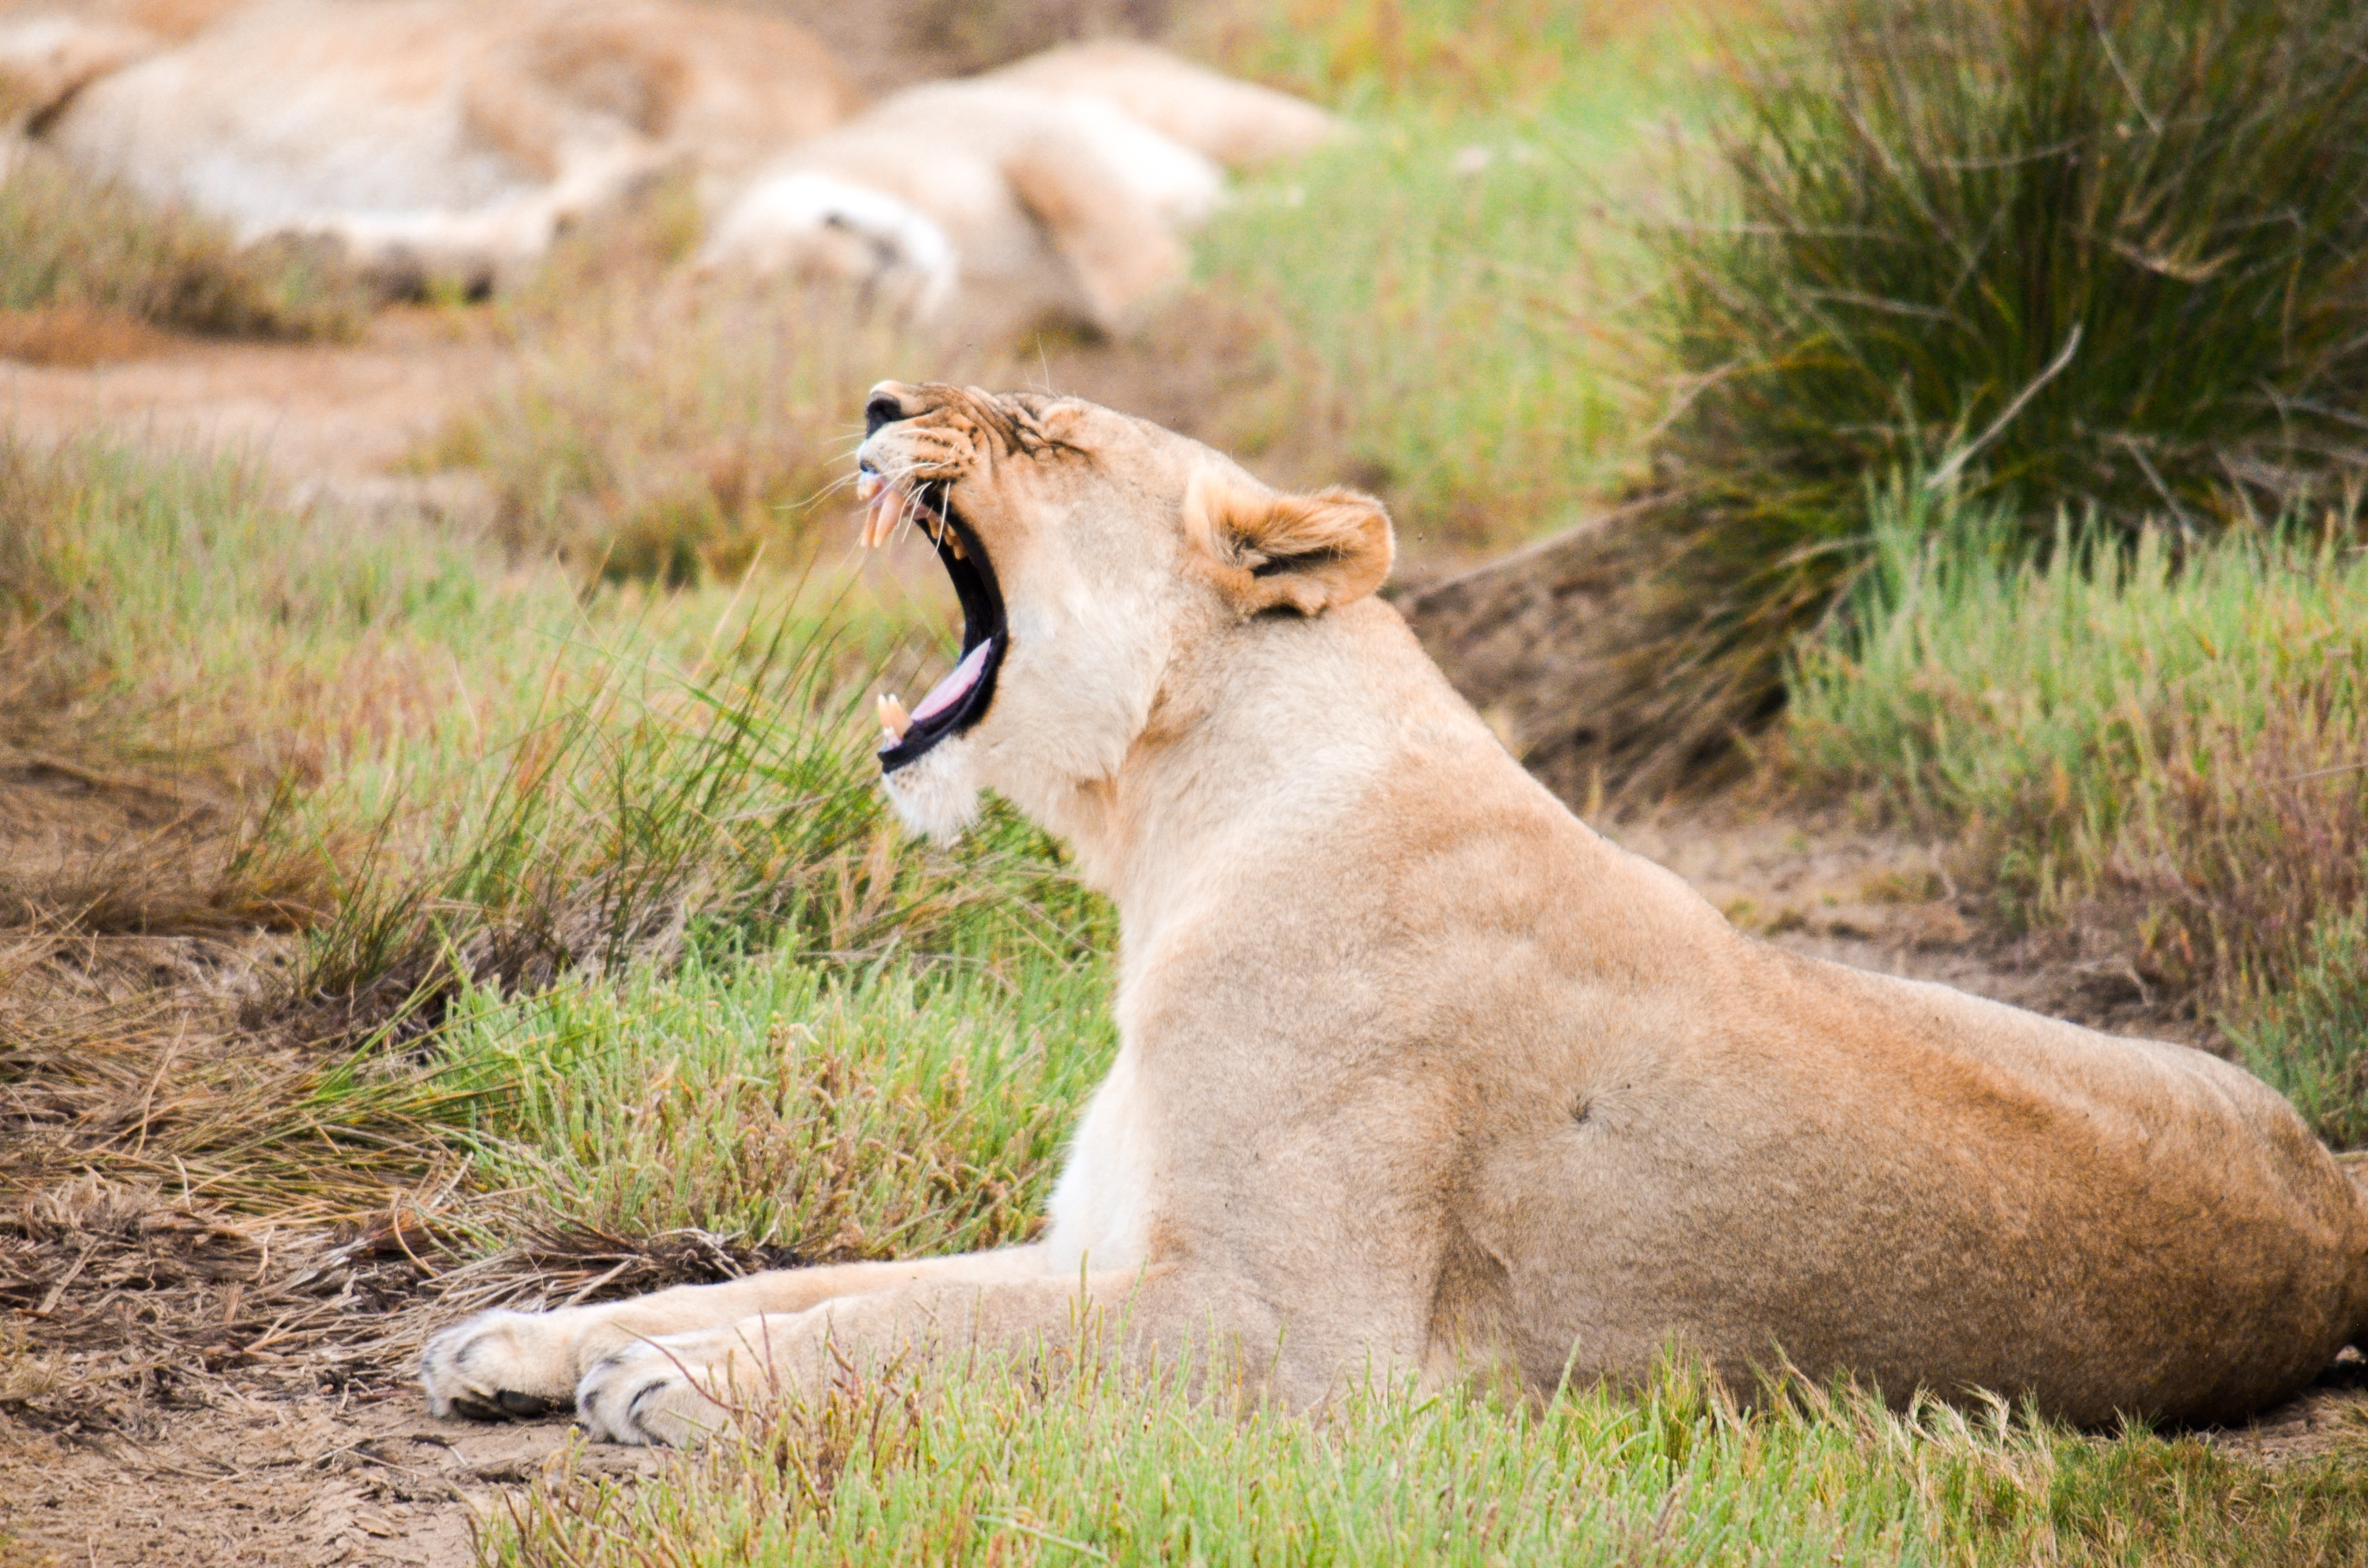 Students on safari at Kariega Game Reserve witness a female lion let out a roar—or a yawn. Photo by Julianne Anderson